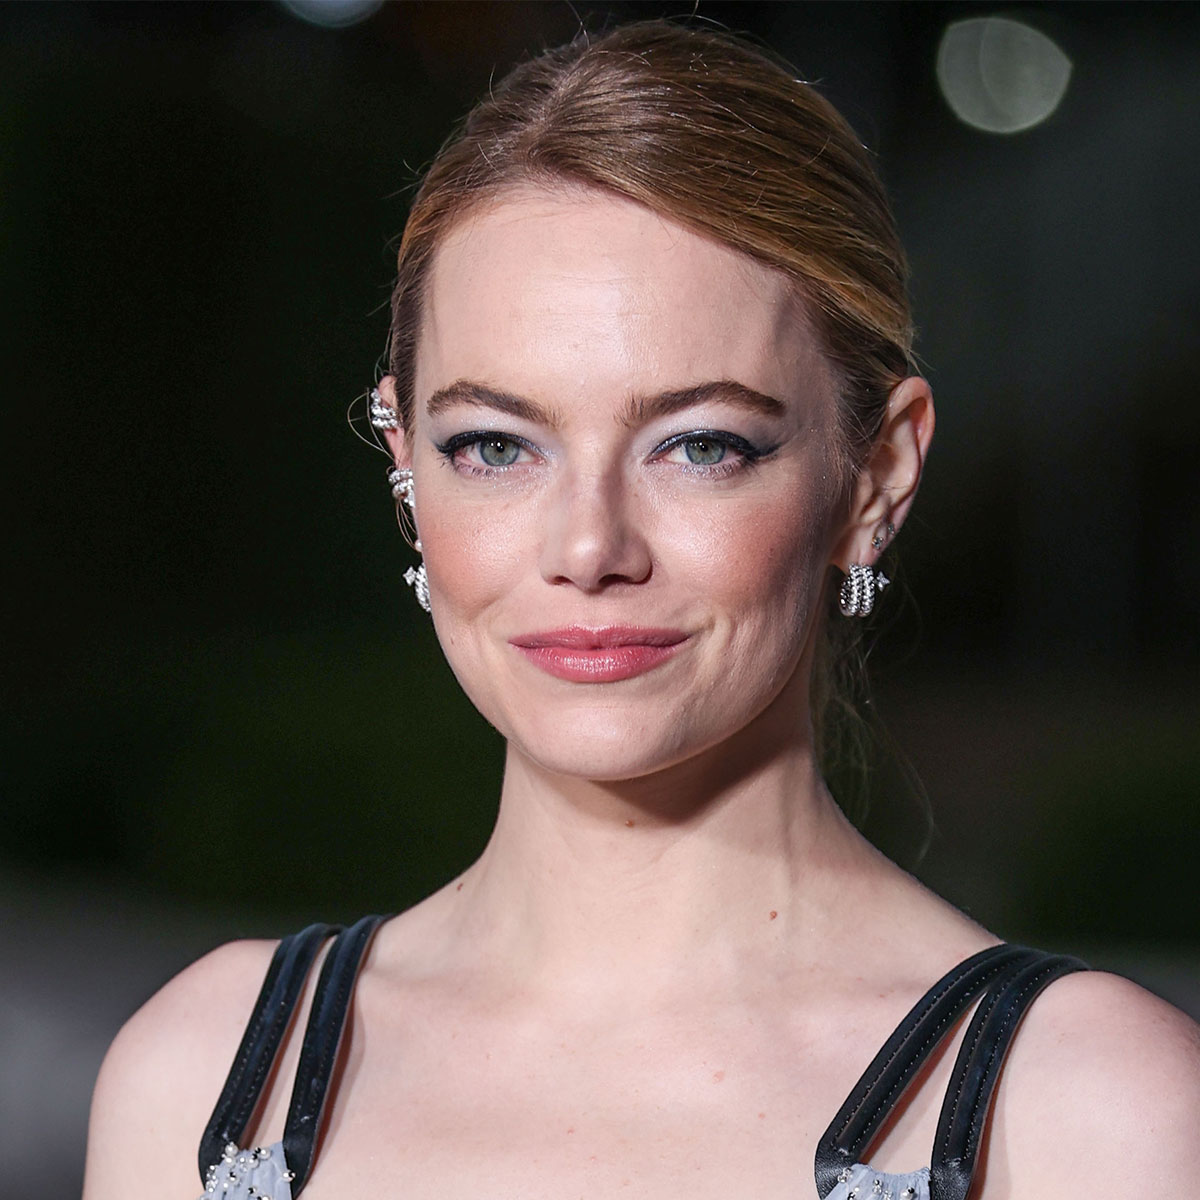 Emma Stone Shows Off Her Tiny Waist In Cinched, Elegant White Louis Vuitton  Gown In Rare Red Carpet Appearance - SHEfinds